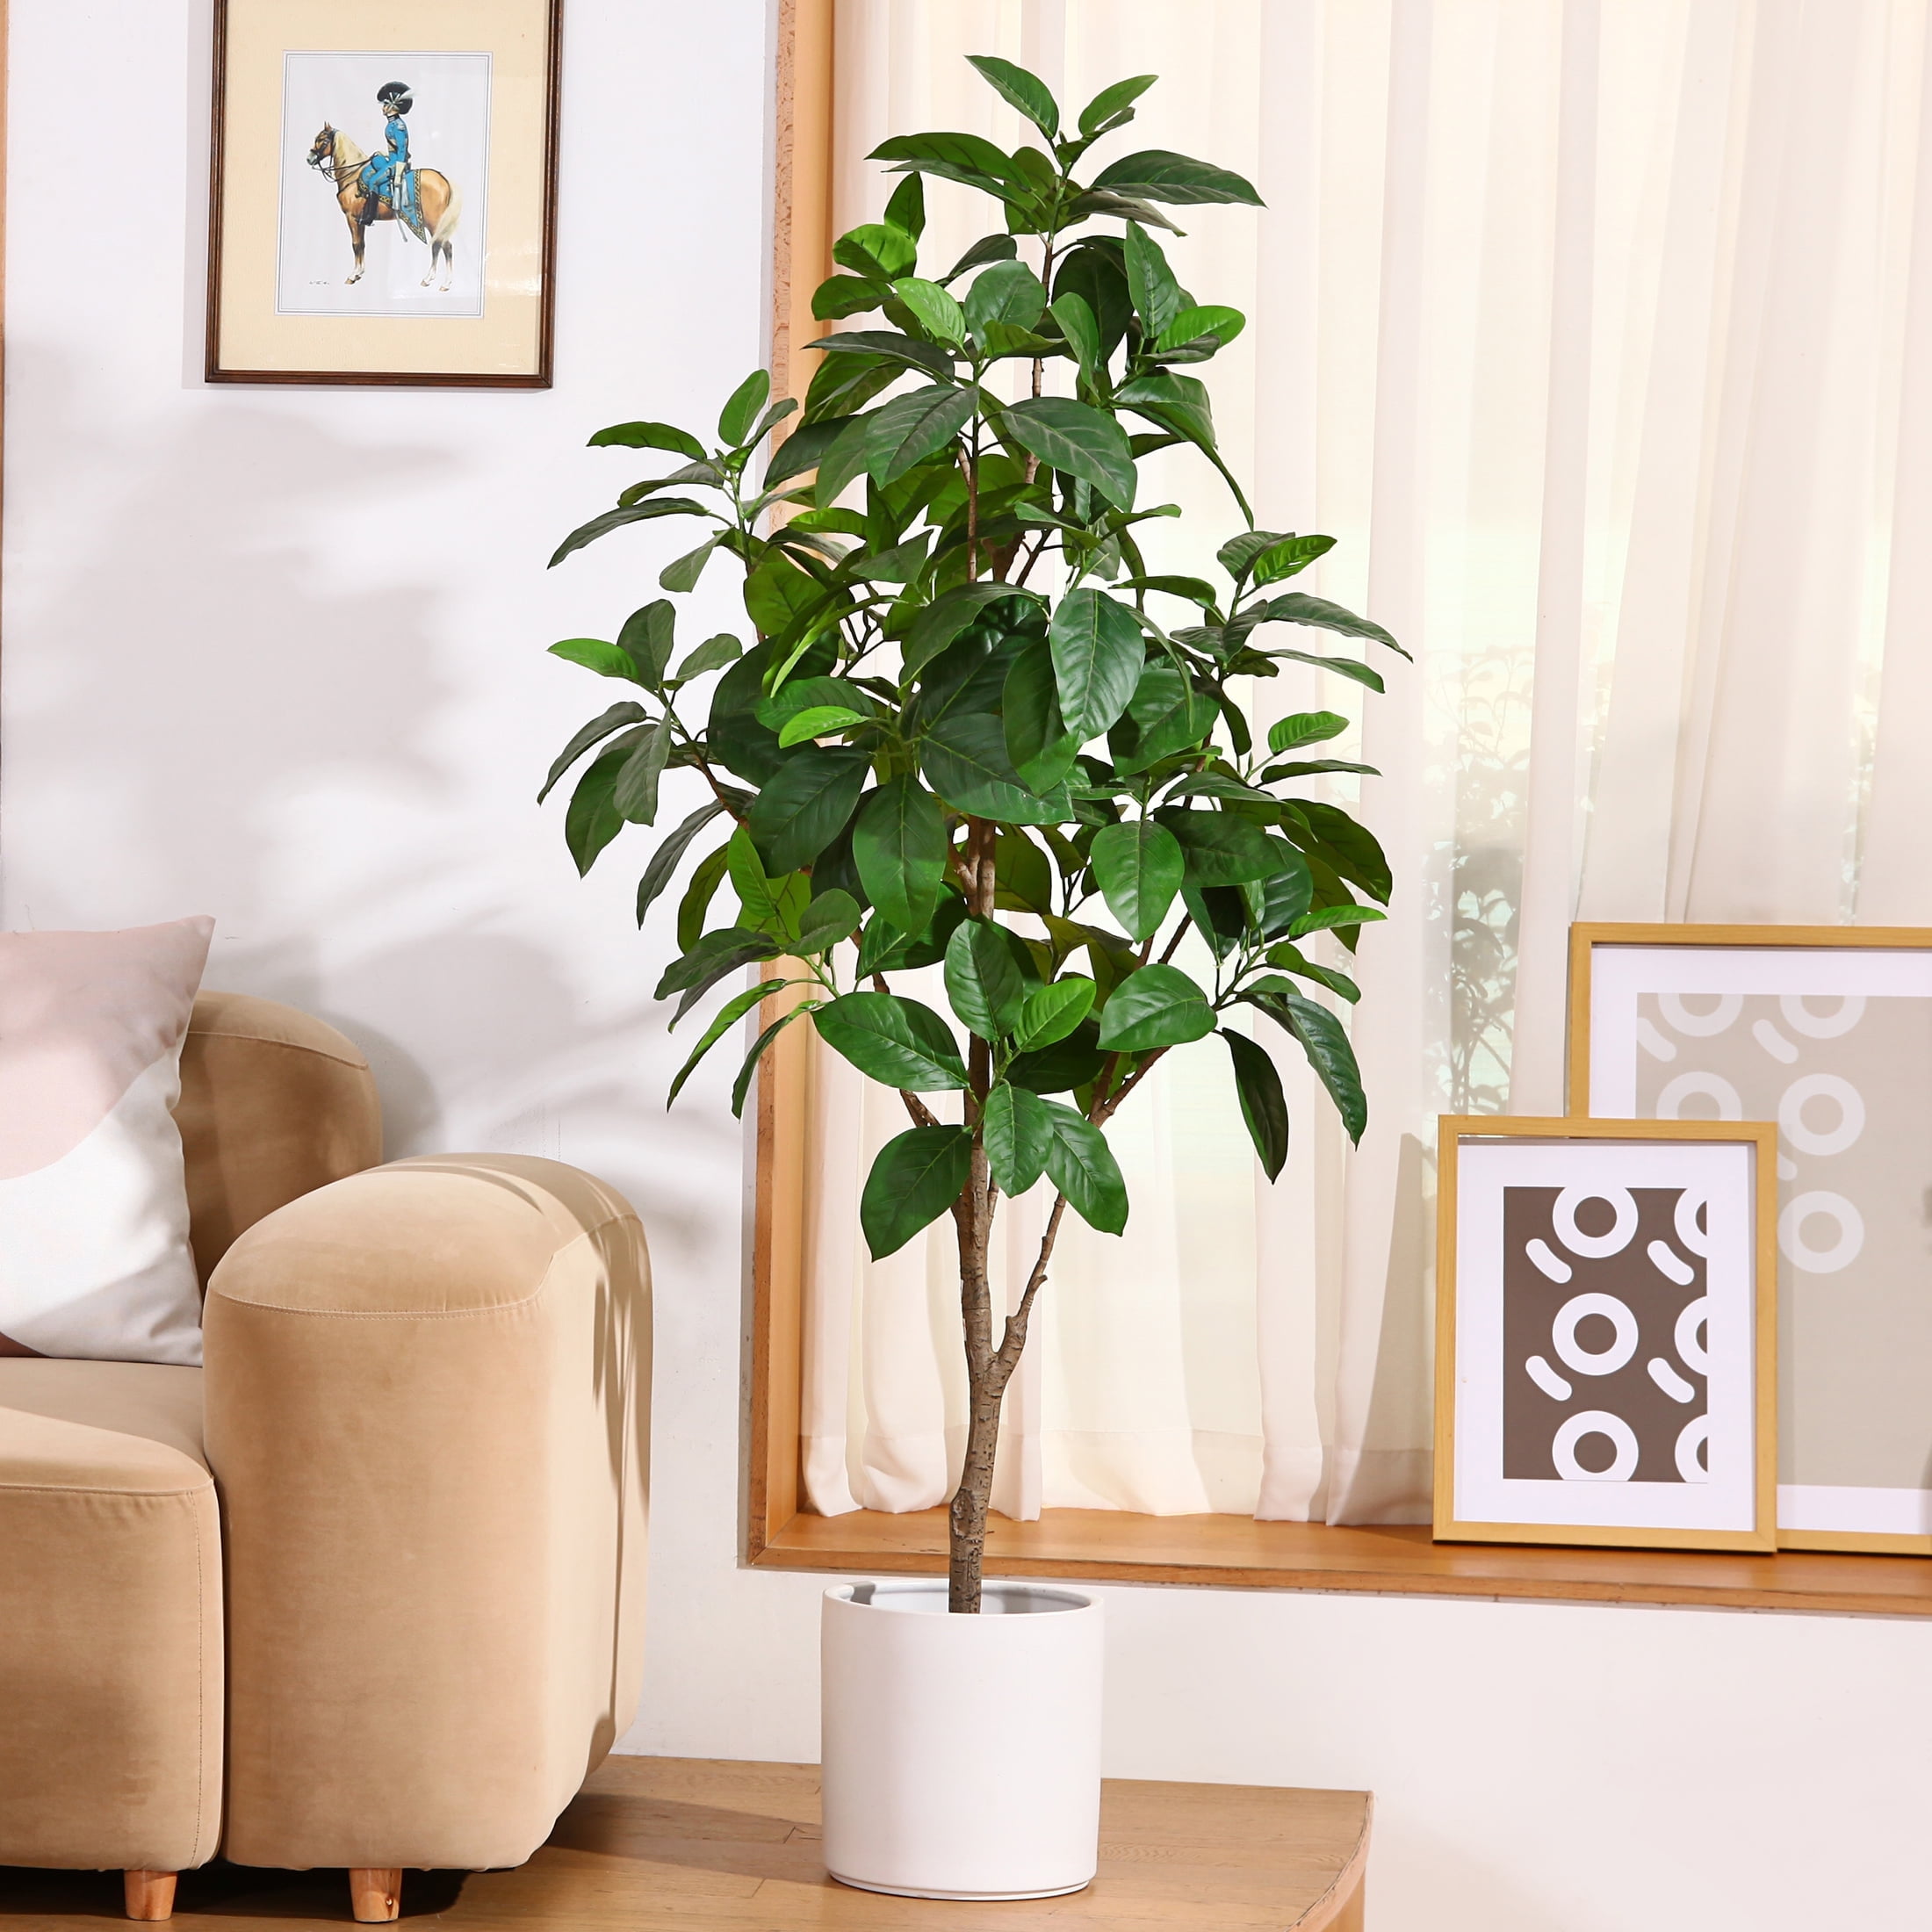 Plant Decoration Ideas for Homes | A Complete Guide to Plant Decor